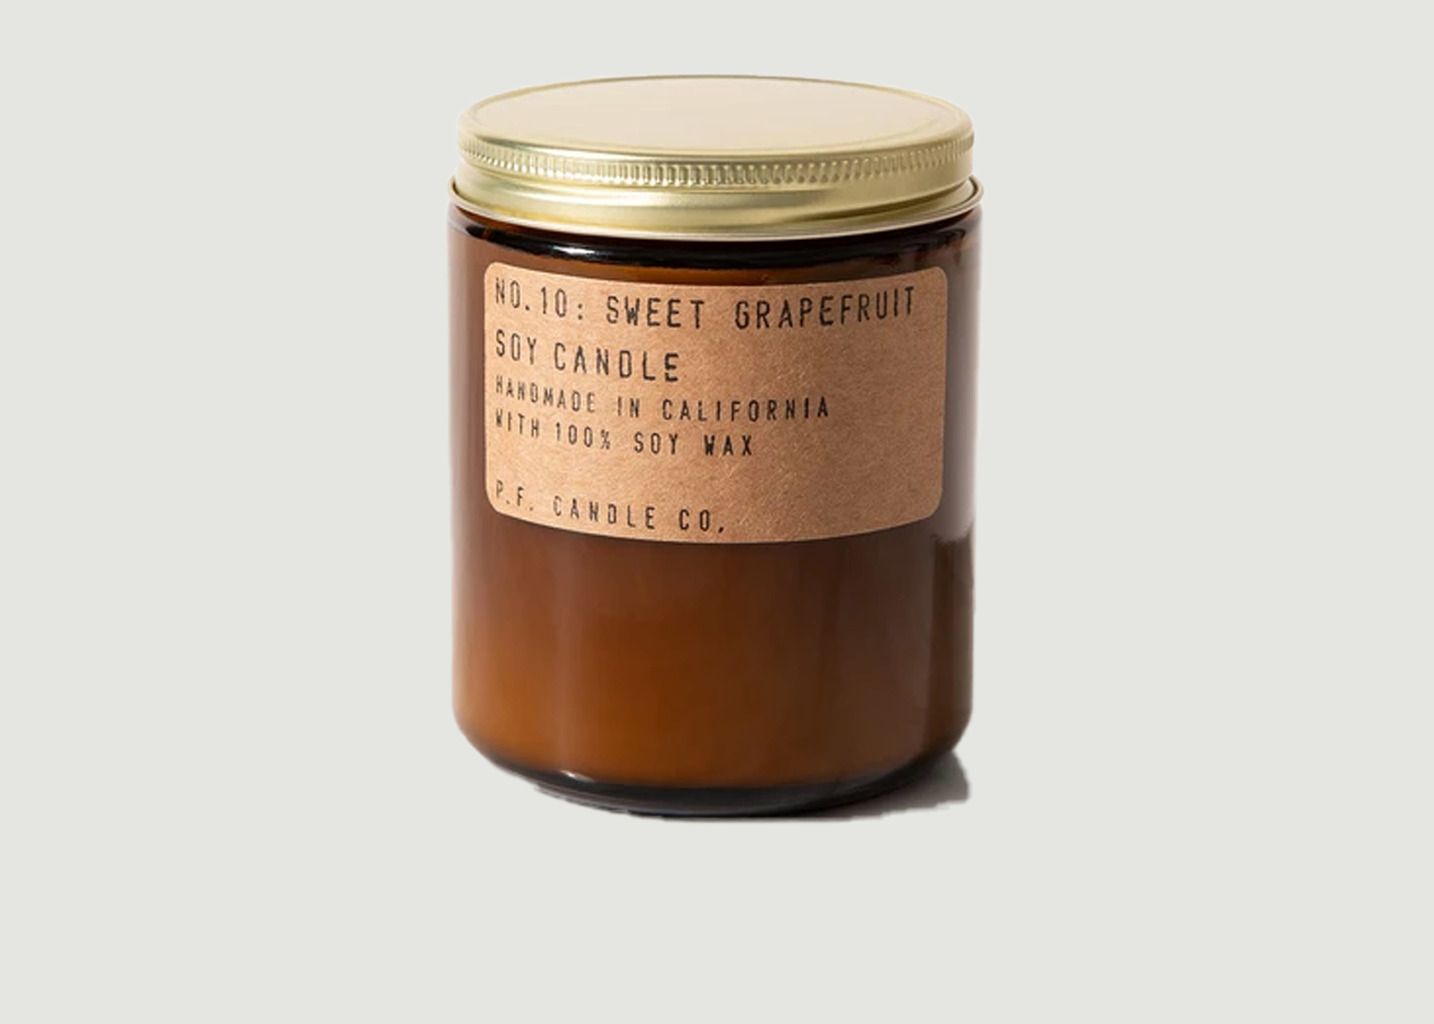 Bougie n°10 Sweet Grapefruit - P.F. Candle CO.